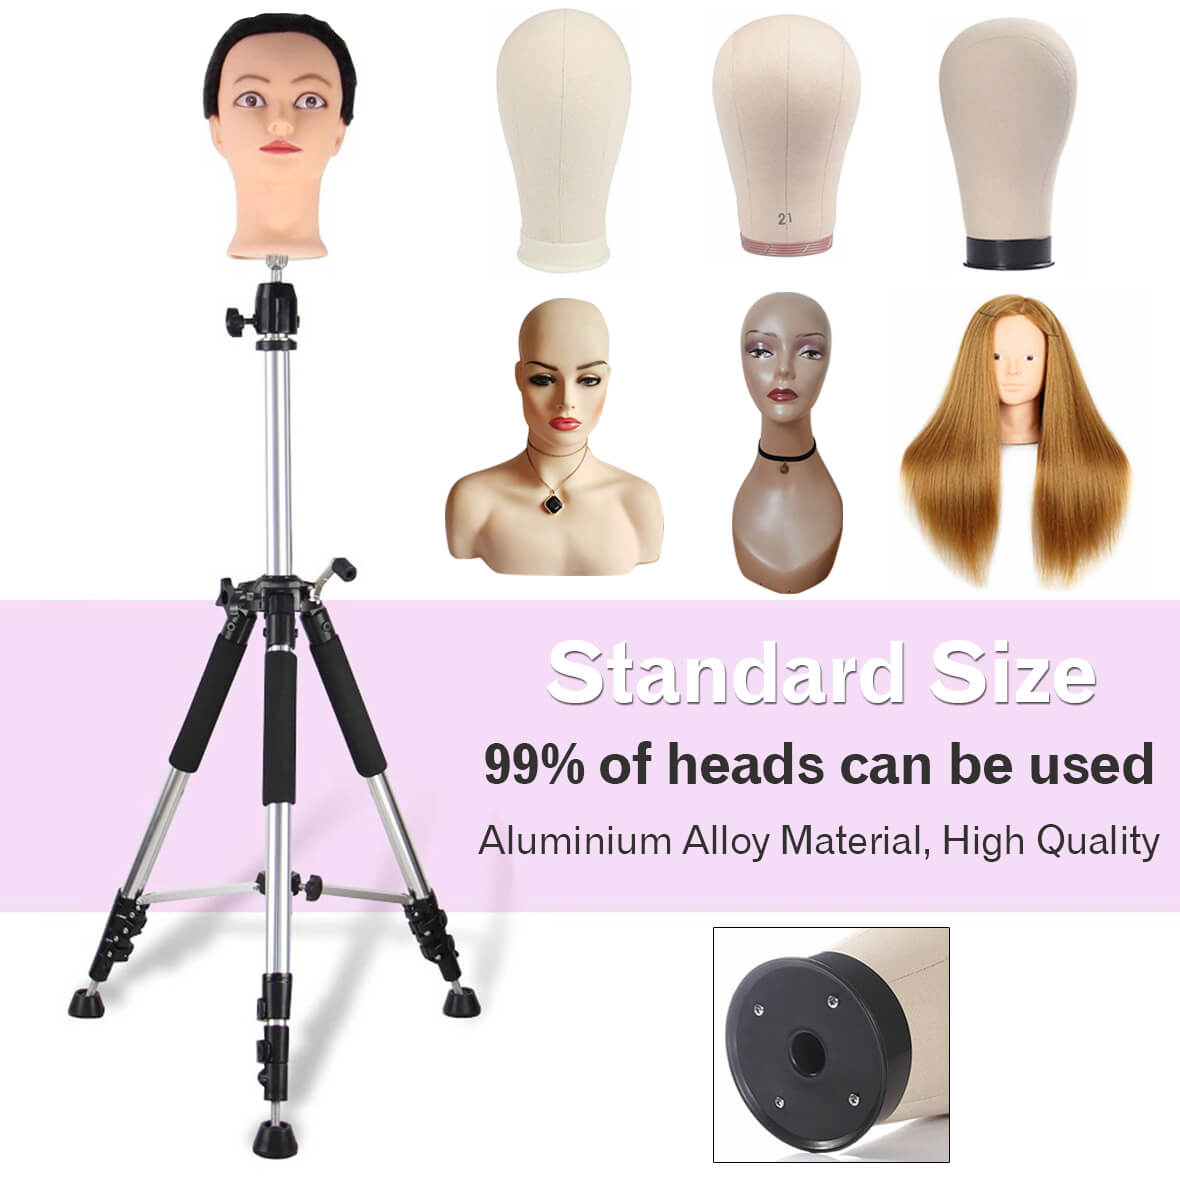 44 Inch Wig Stand Tripod Mannequin Head Stand Heavy Duty Wig Stand